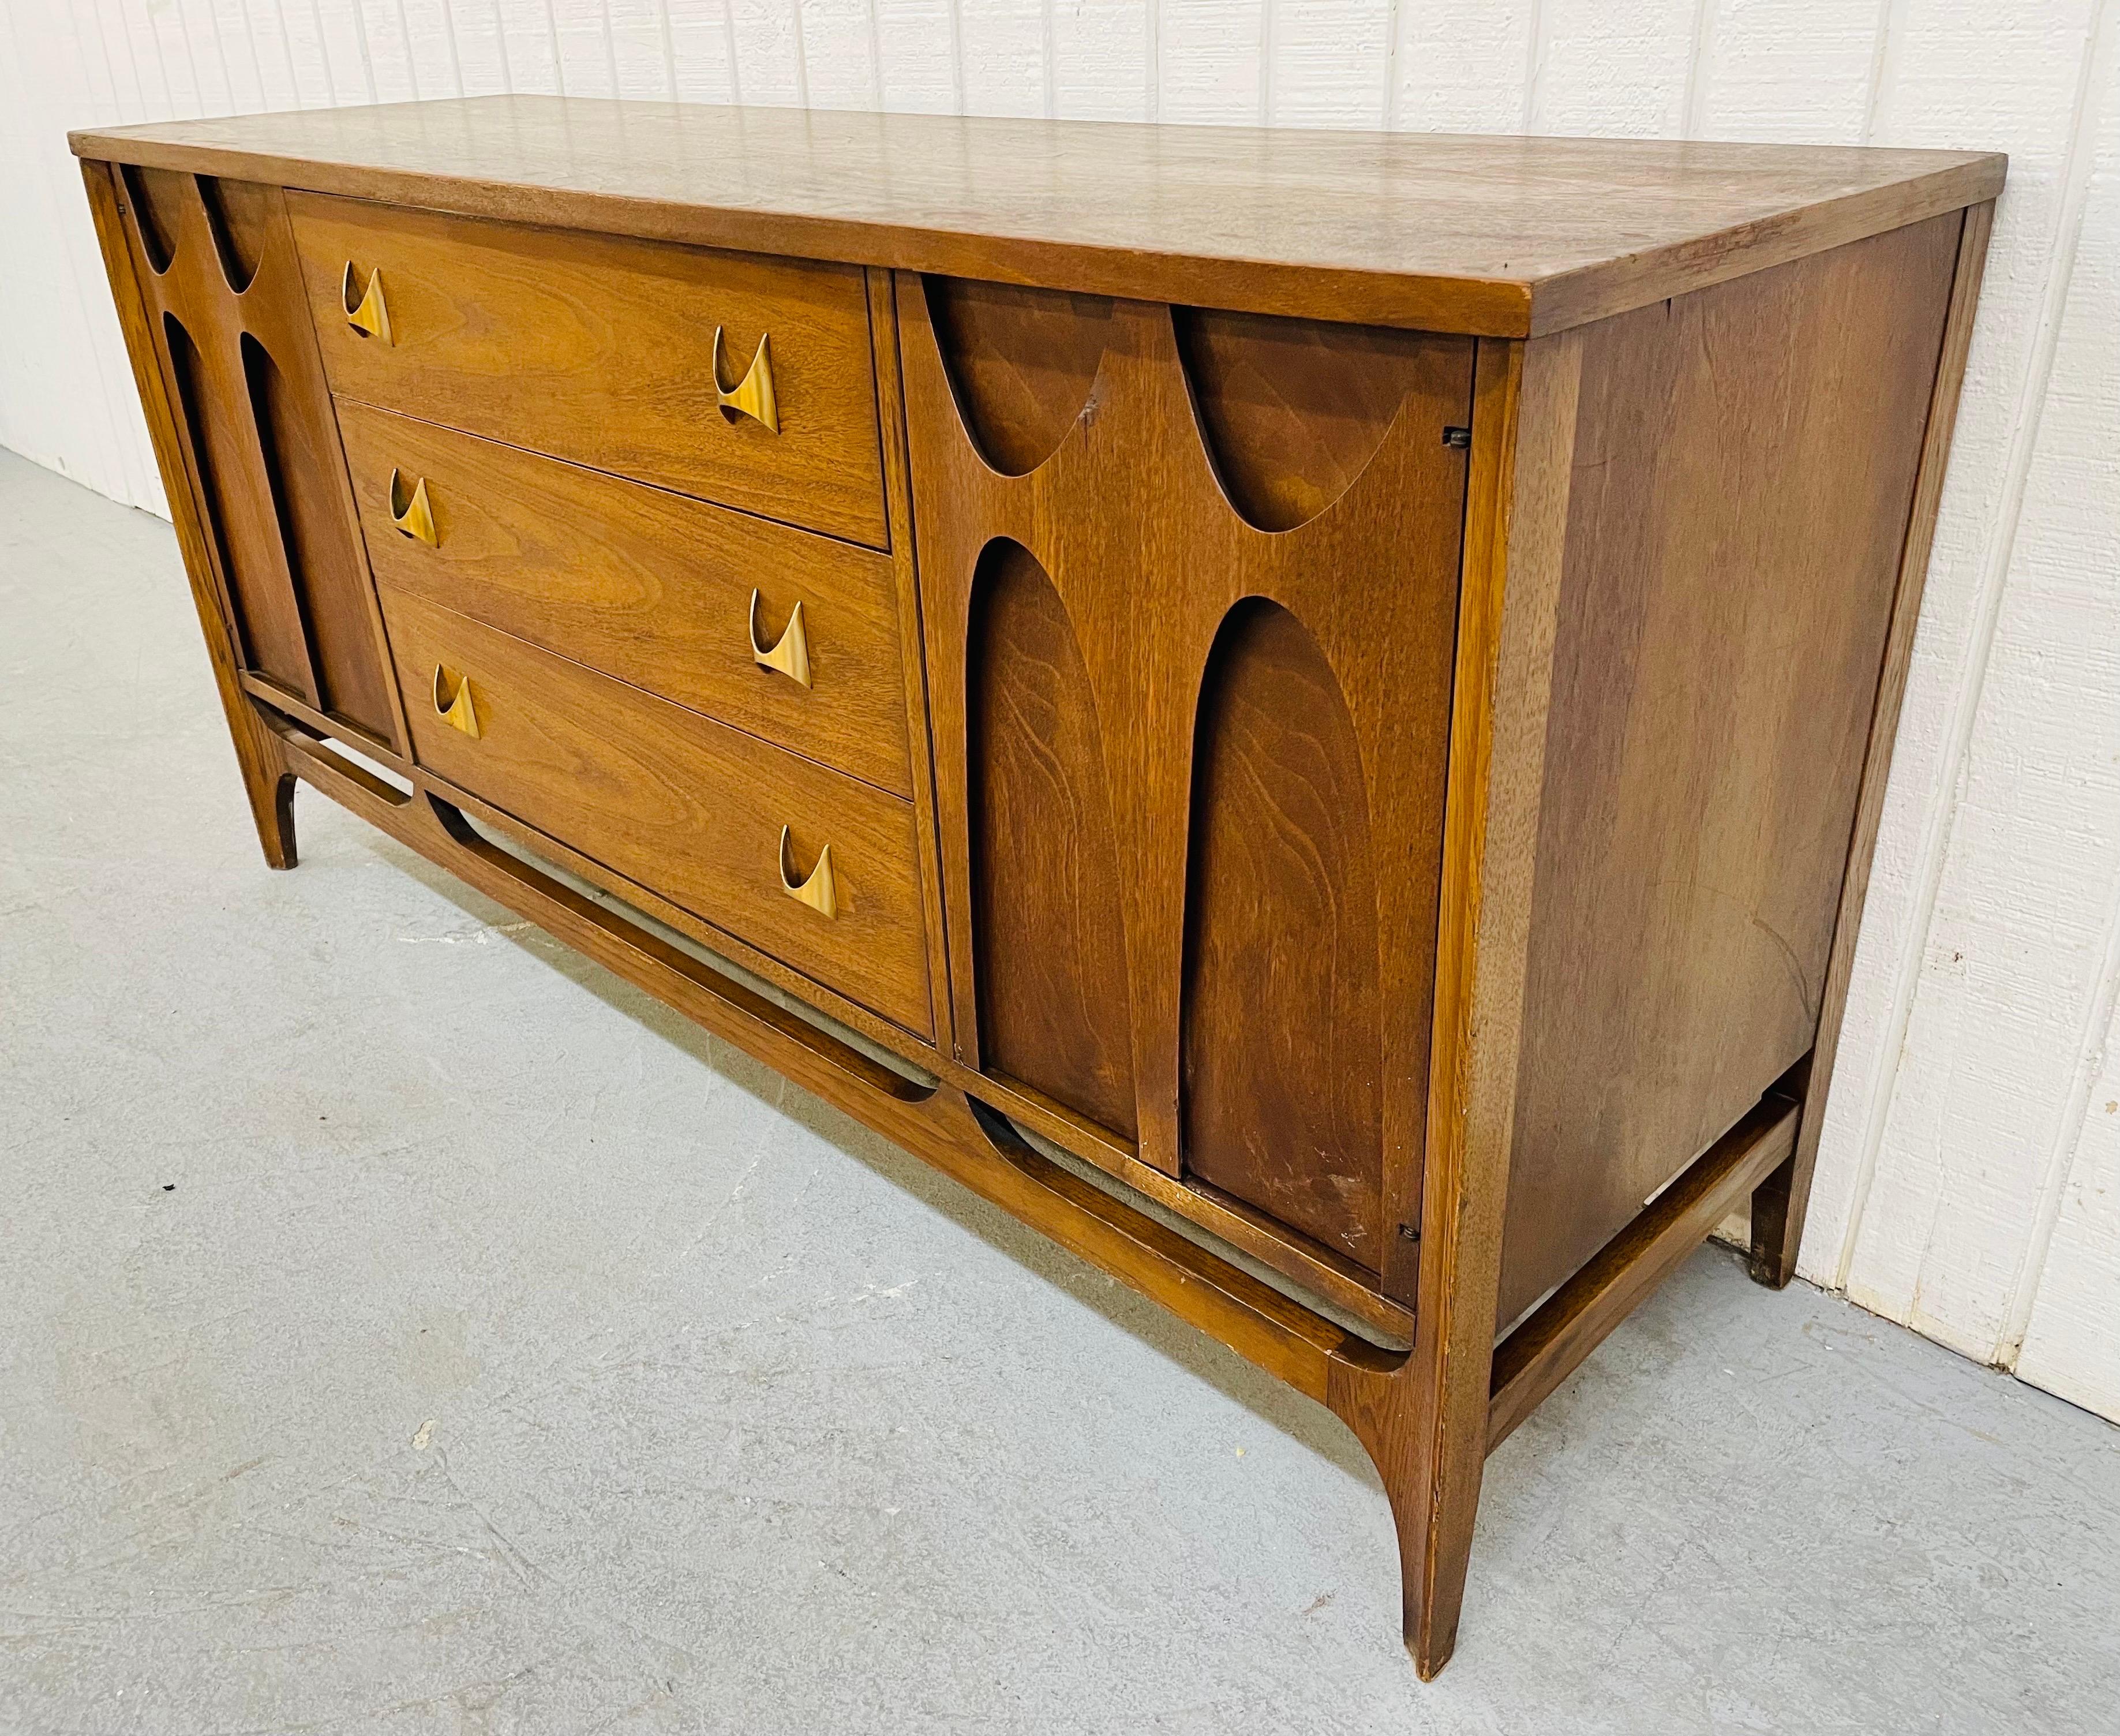 This listing is for a Mid-Century Modern Broyhill Brasilia walnut server. Featuring two doors with the iconic Brasilia curved wood arches that open up to storage space, three center drawers with the iconic Brasilia brass hardware, and a beautiful